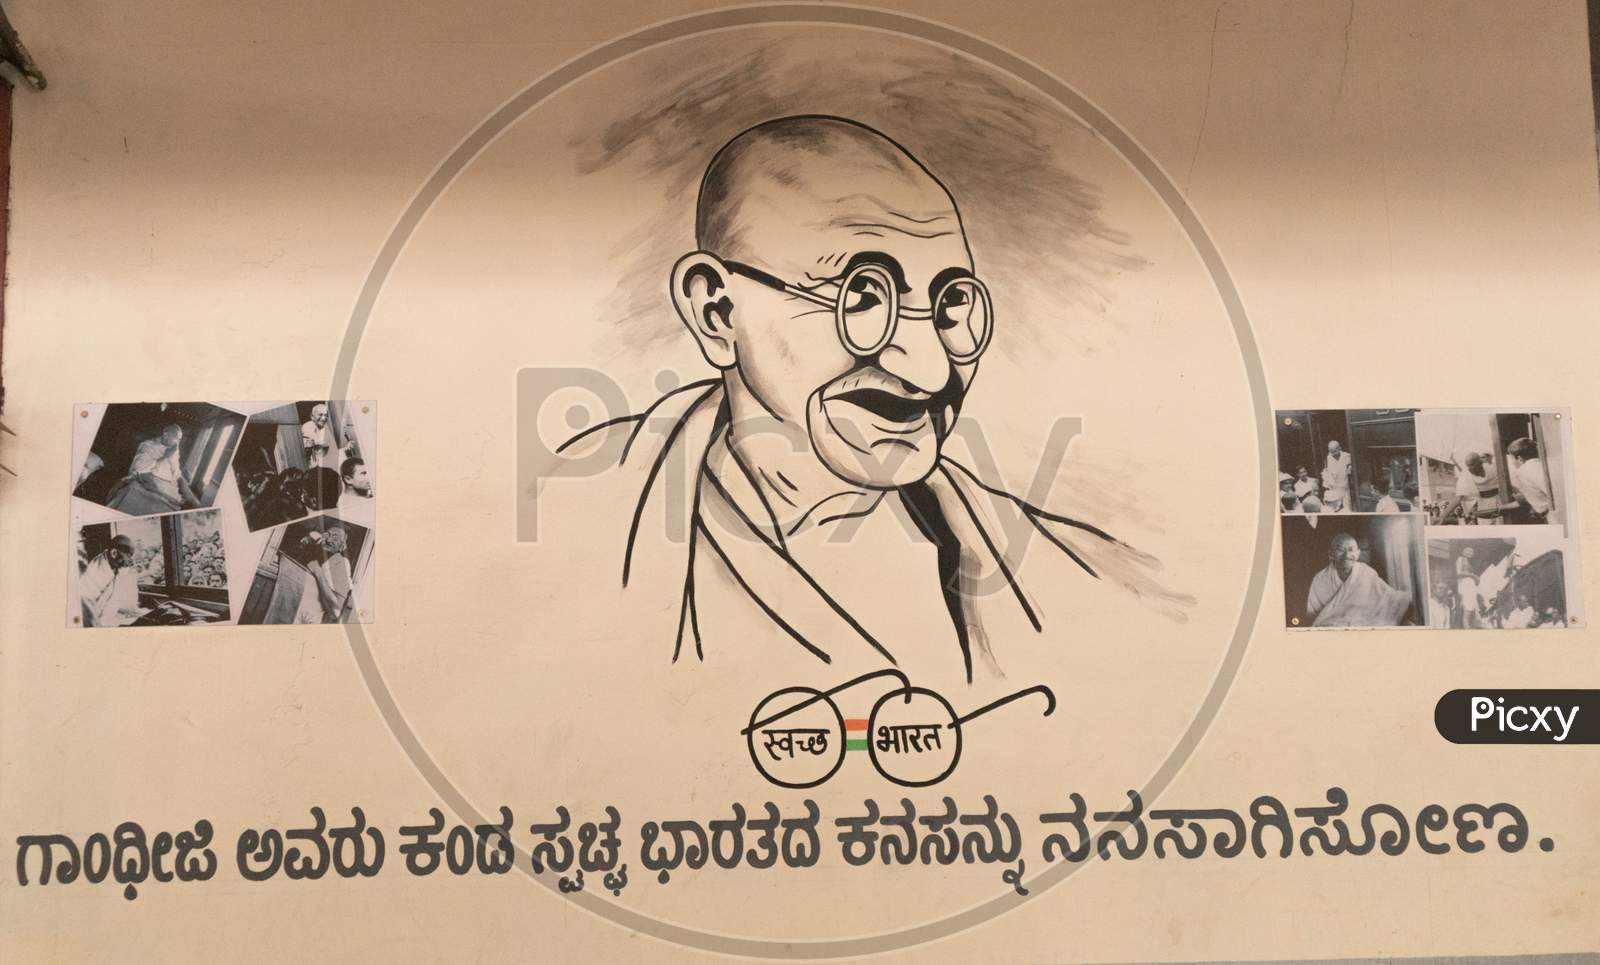 Bangalore India - June 3, 2019: Painting Of Mahatma Gandhi At Indian Railway Station With Images Of Indian Freedom Struggle And Swachh Bharath Campaign Symbol